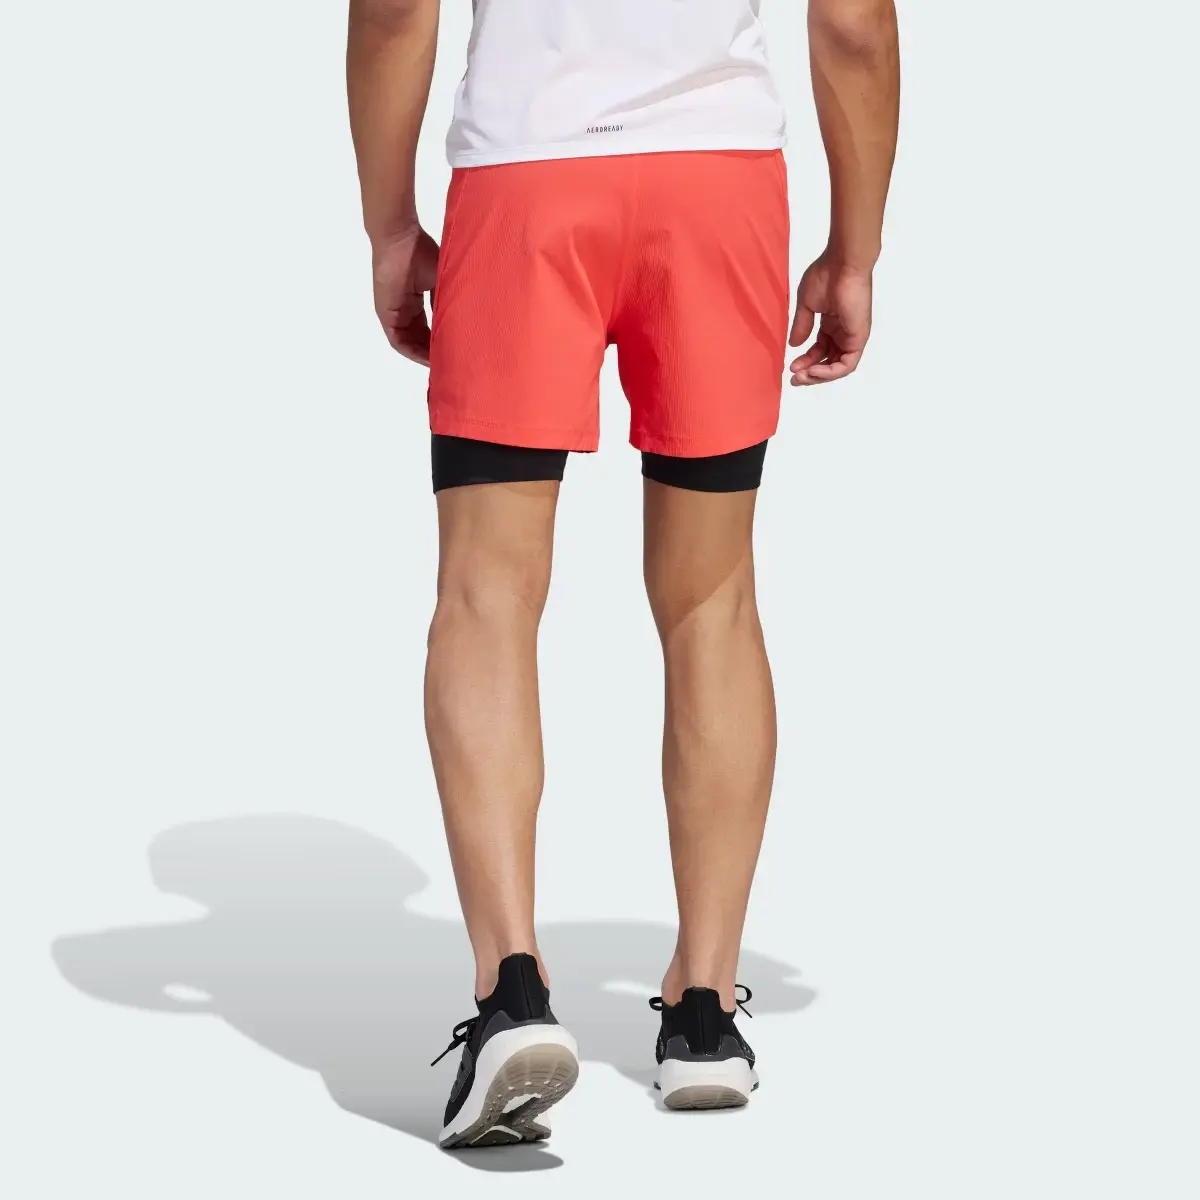 Adidas Short Power Workout Two-in-One. 2